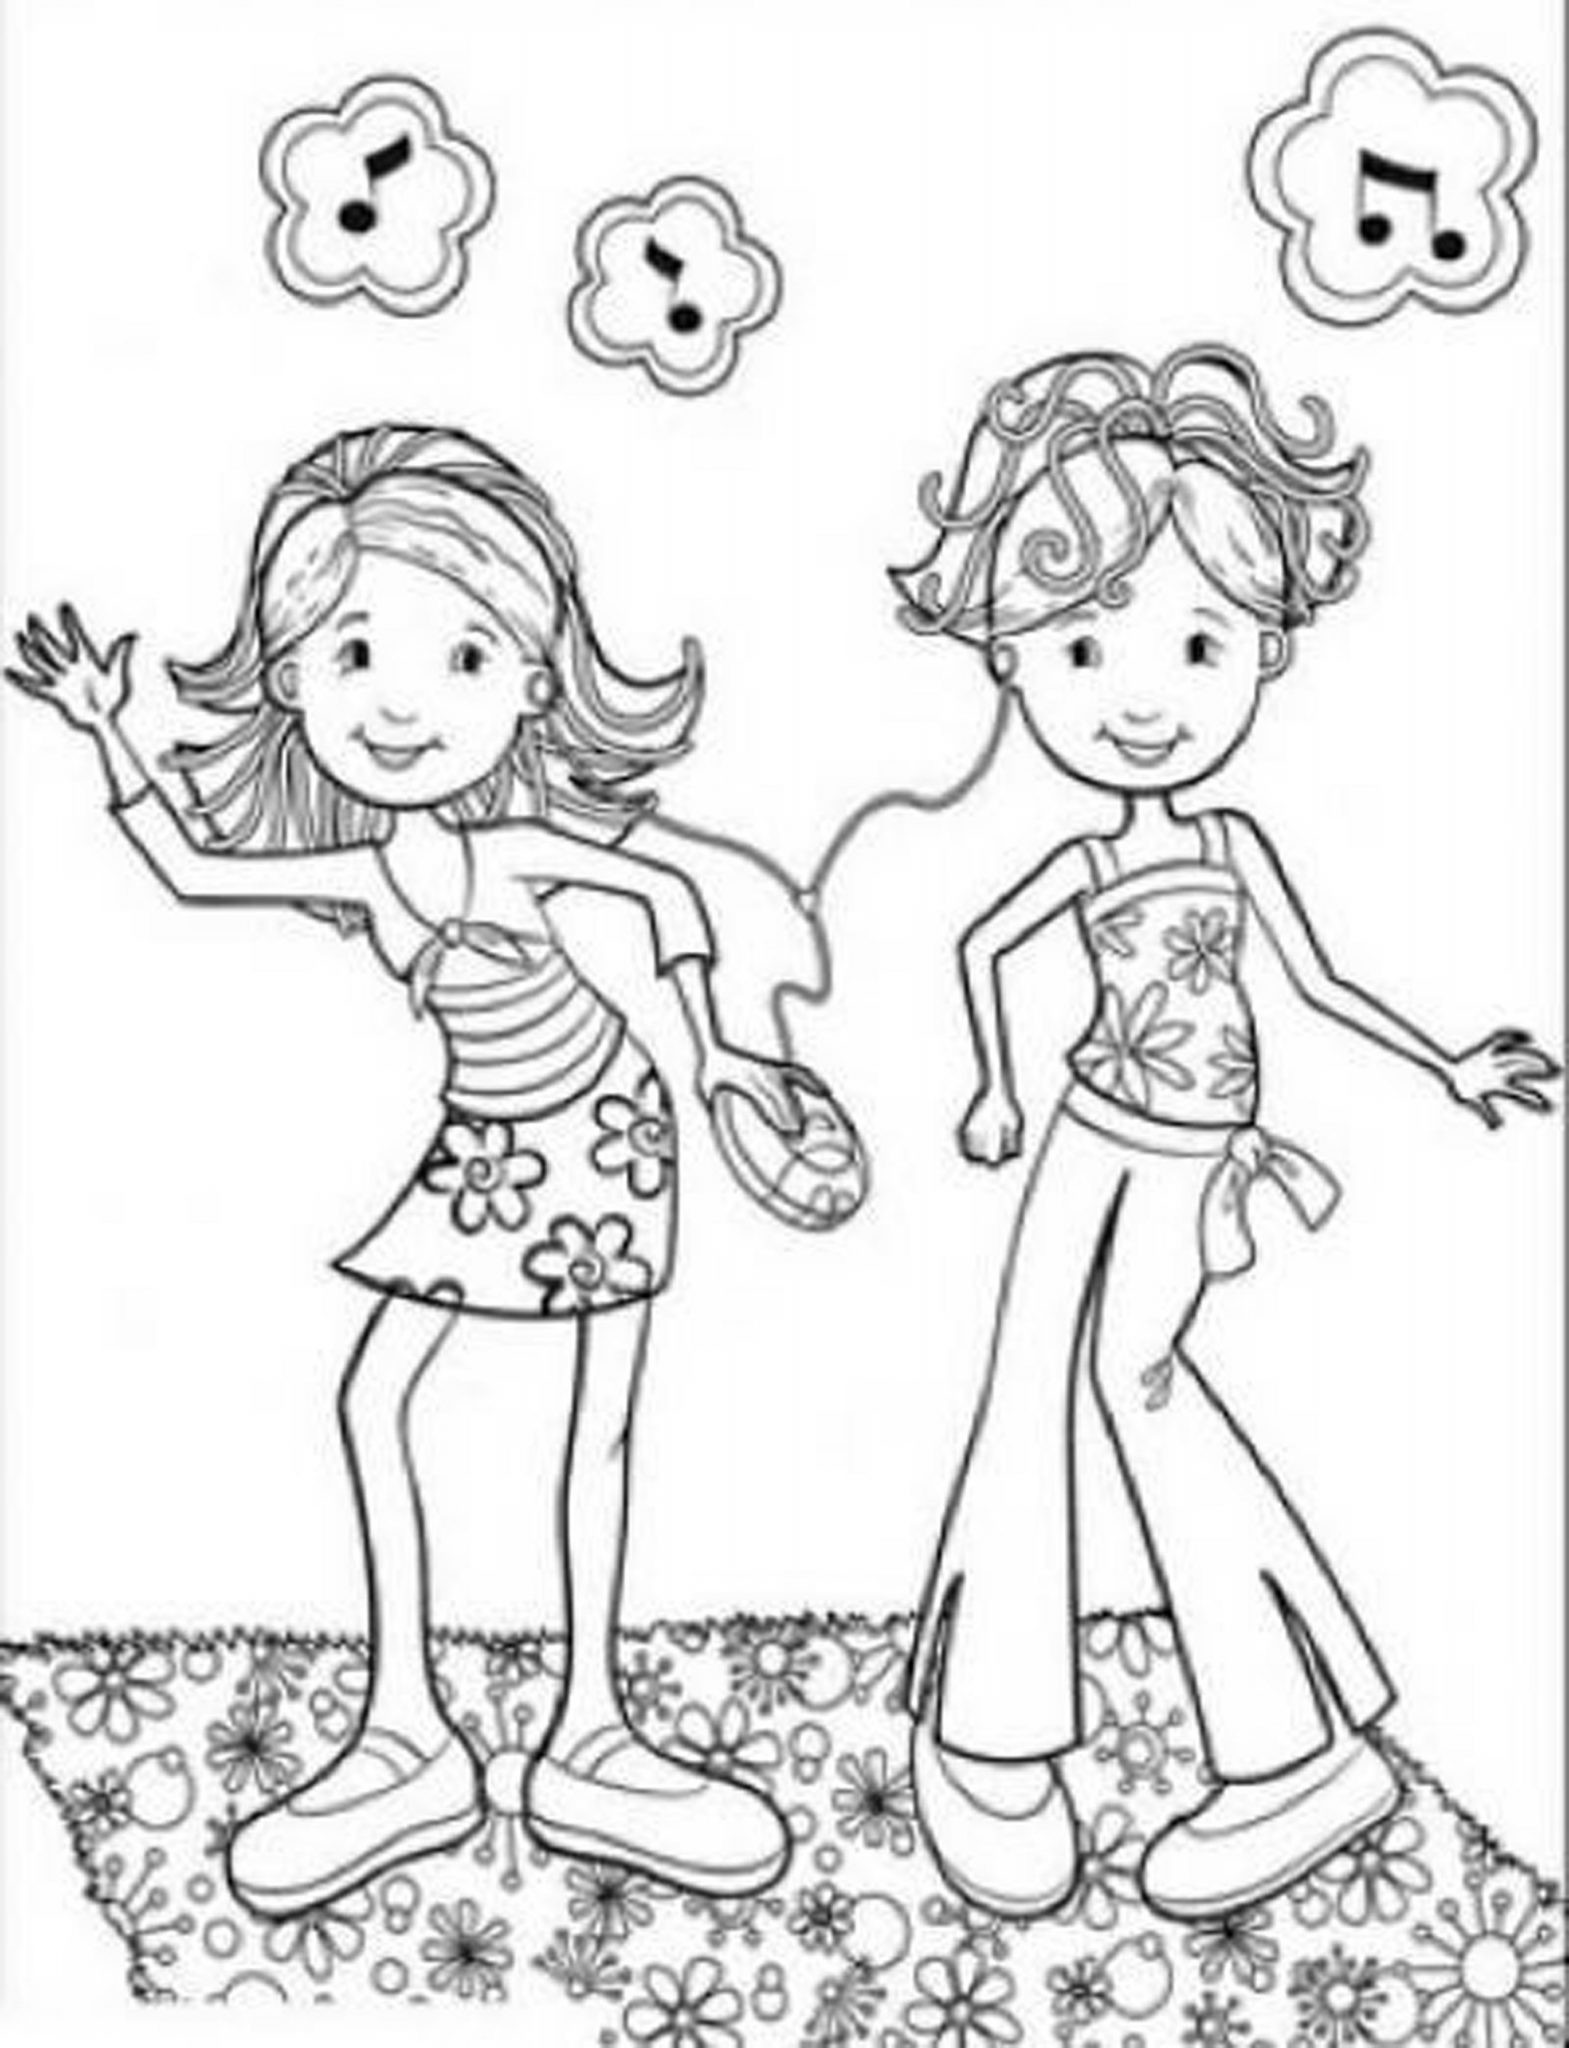 Cute Coloring Pages For Girls
 cute coloring pages for girls